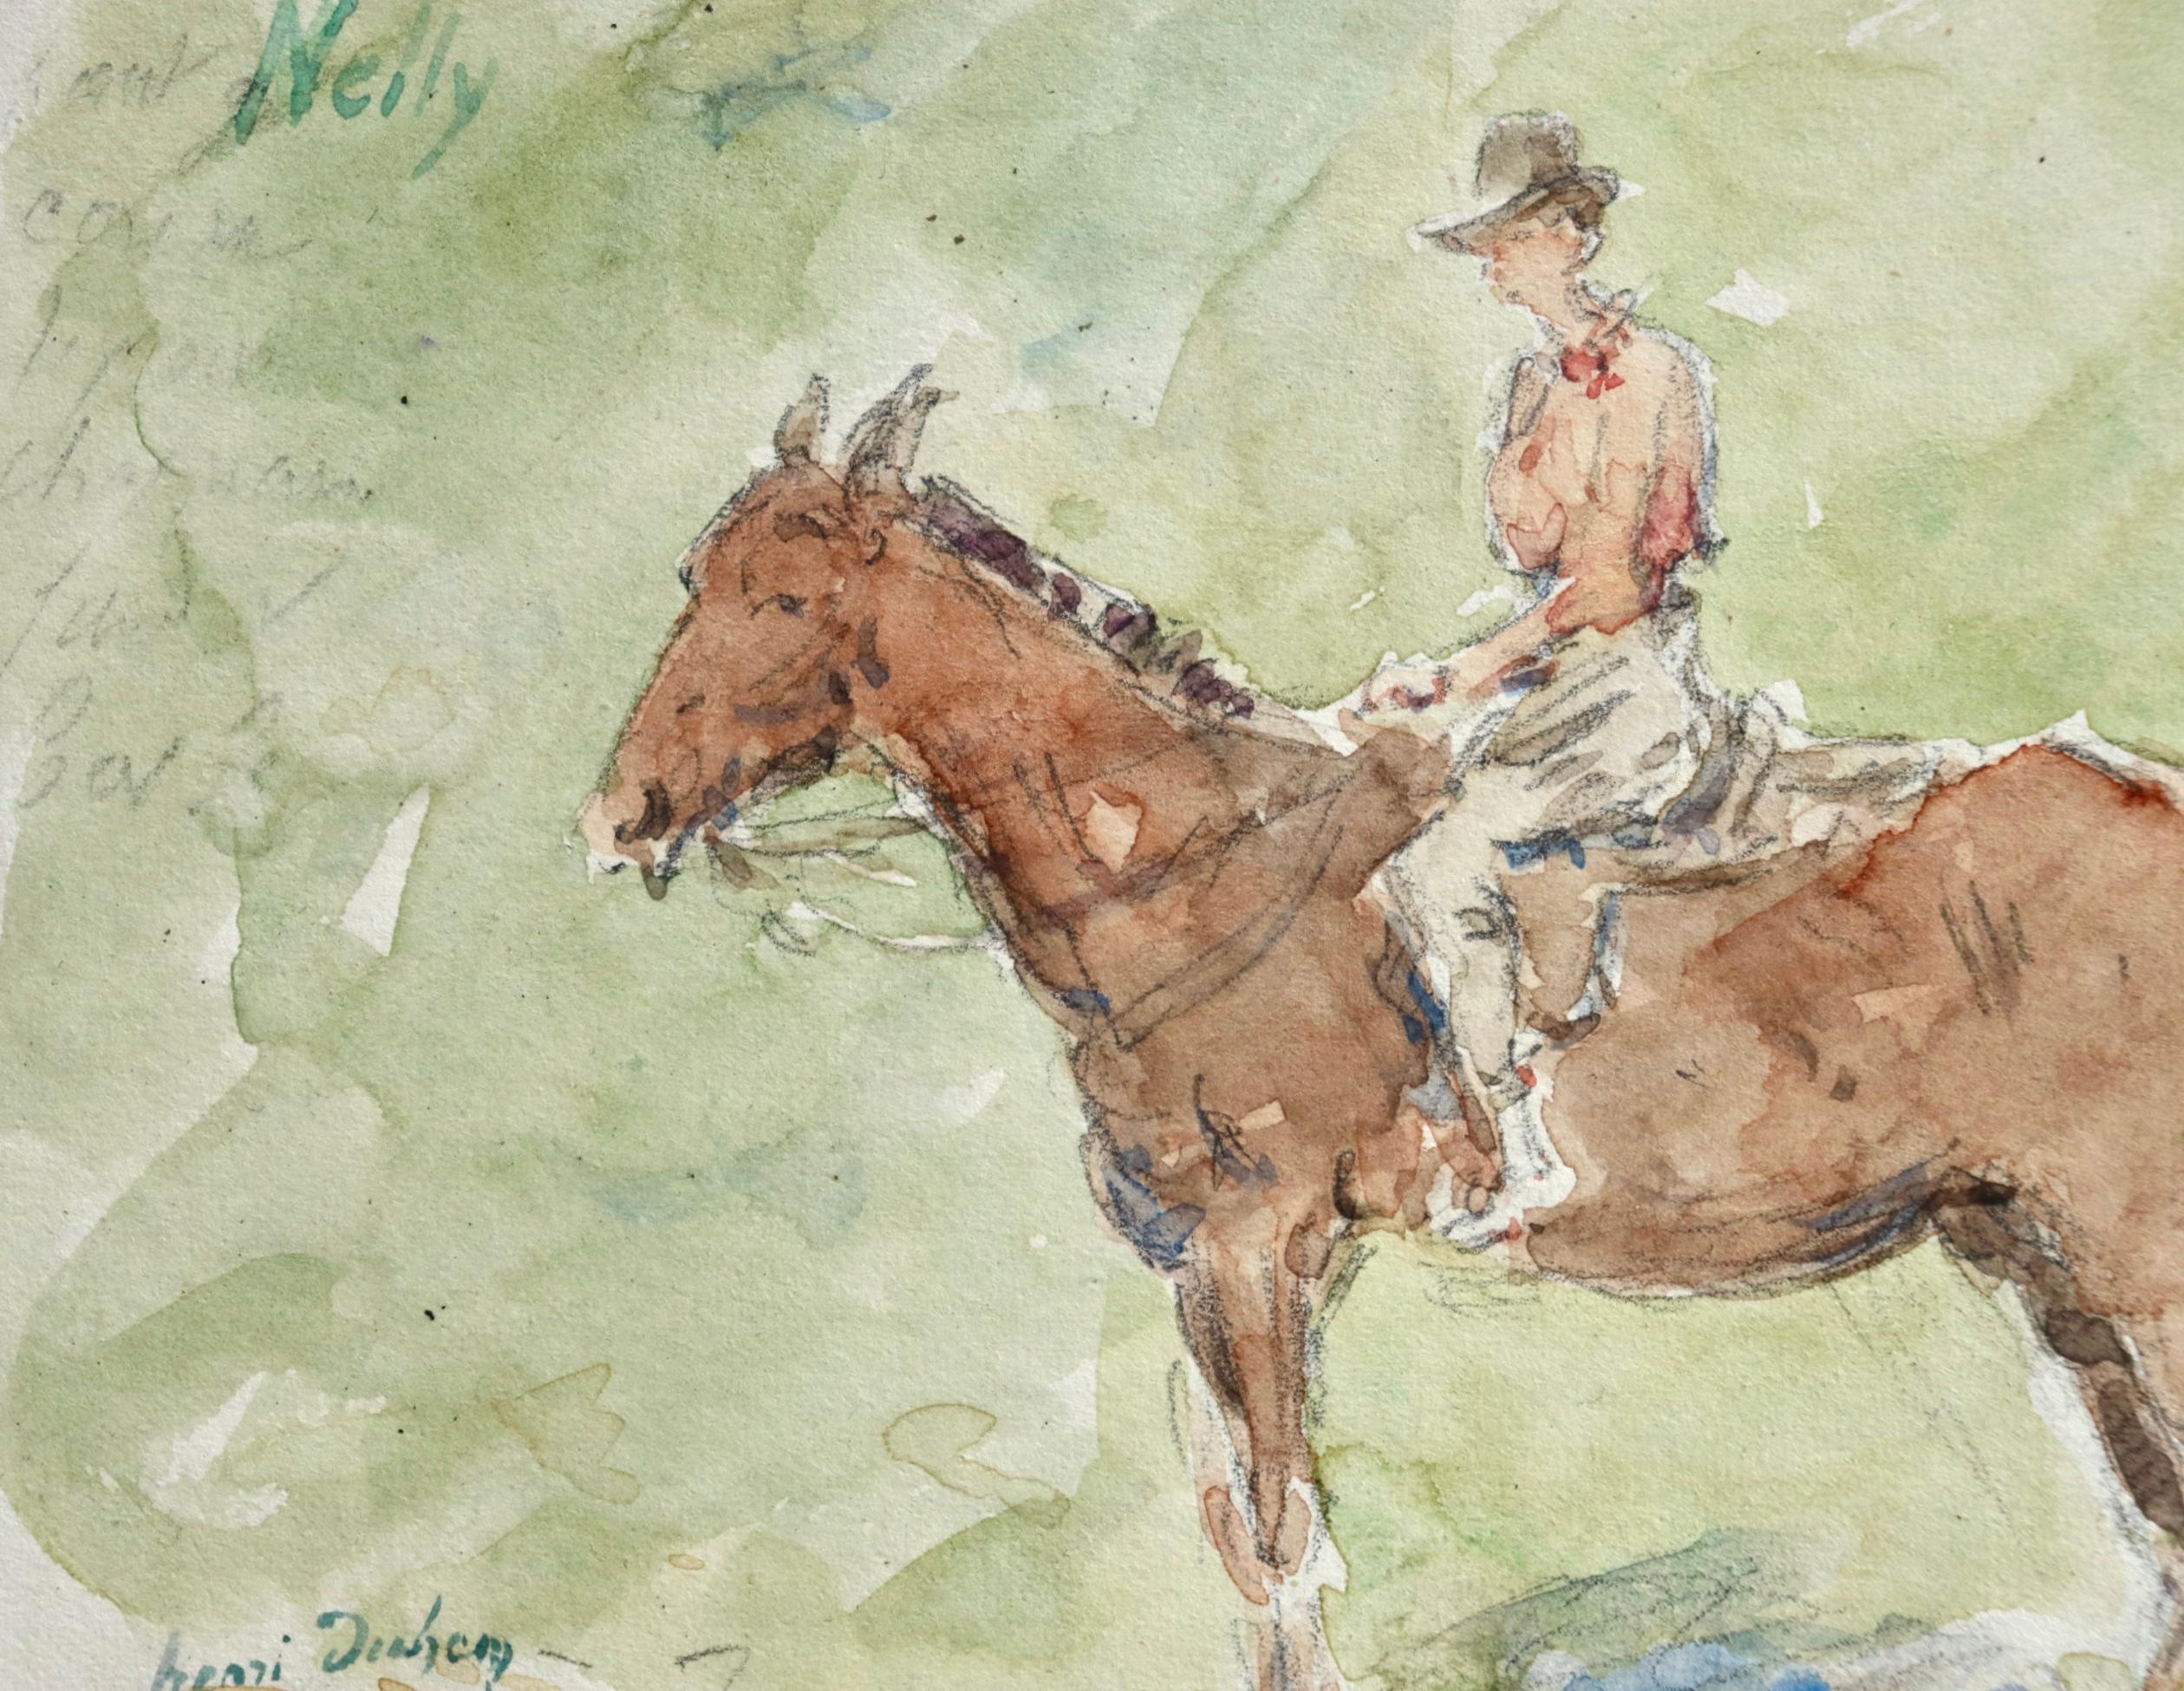 Nelly - French Impressionist Watercolor, Figure on a Horse by Henri Duhem 1